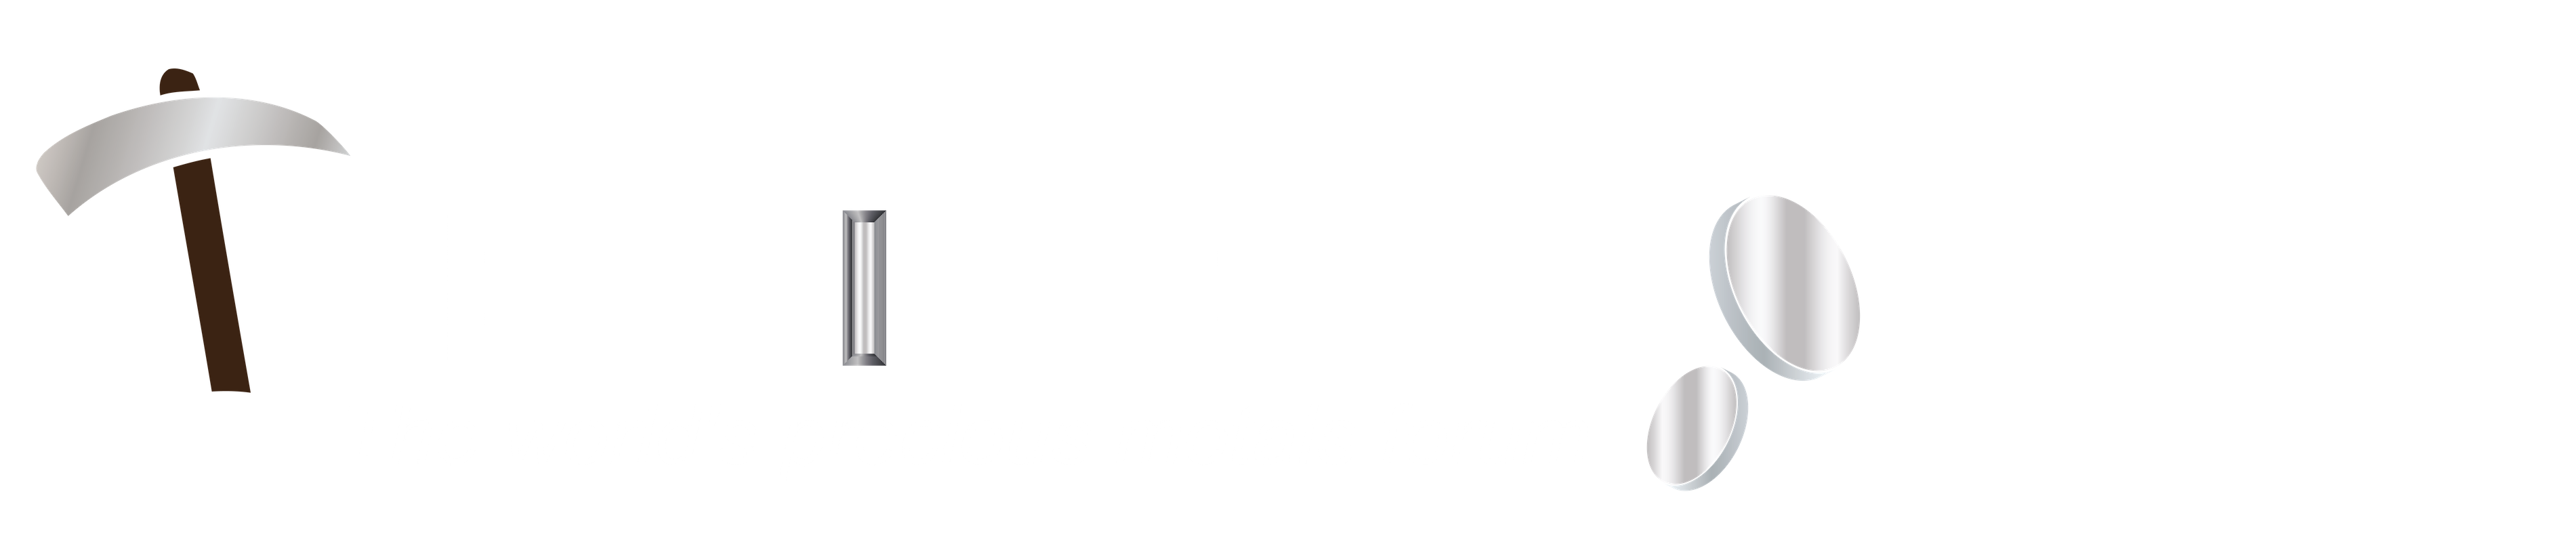 The Silver Forum